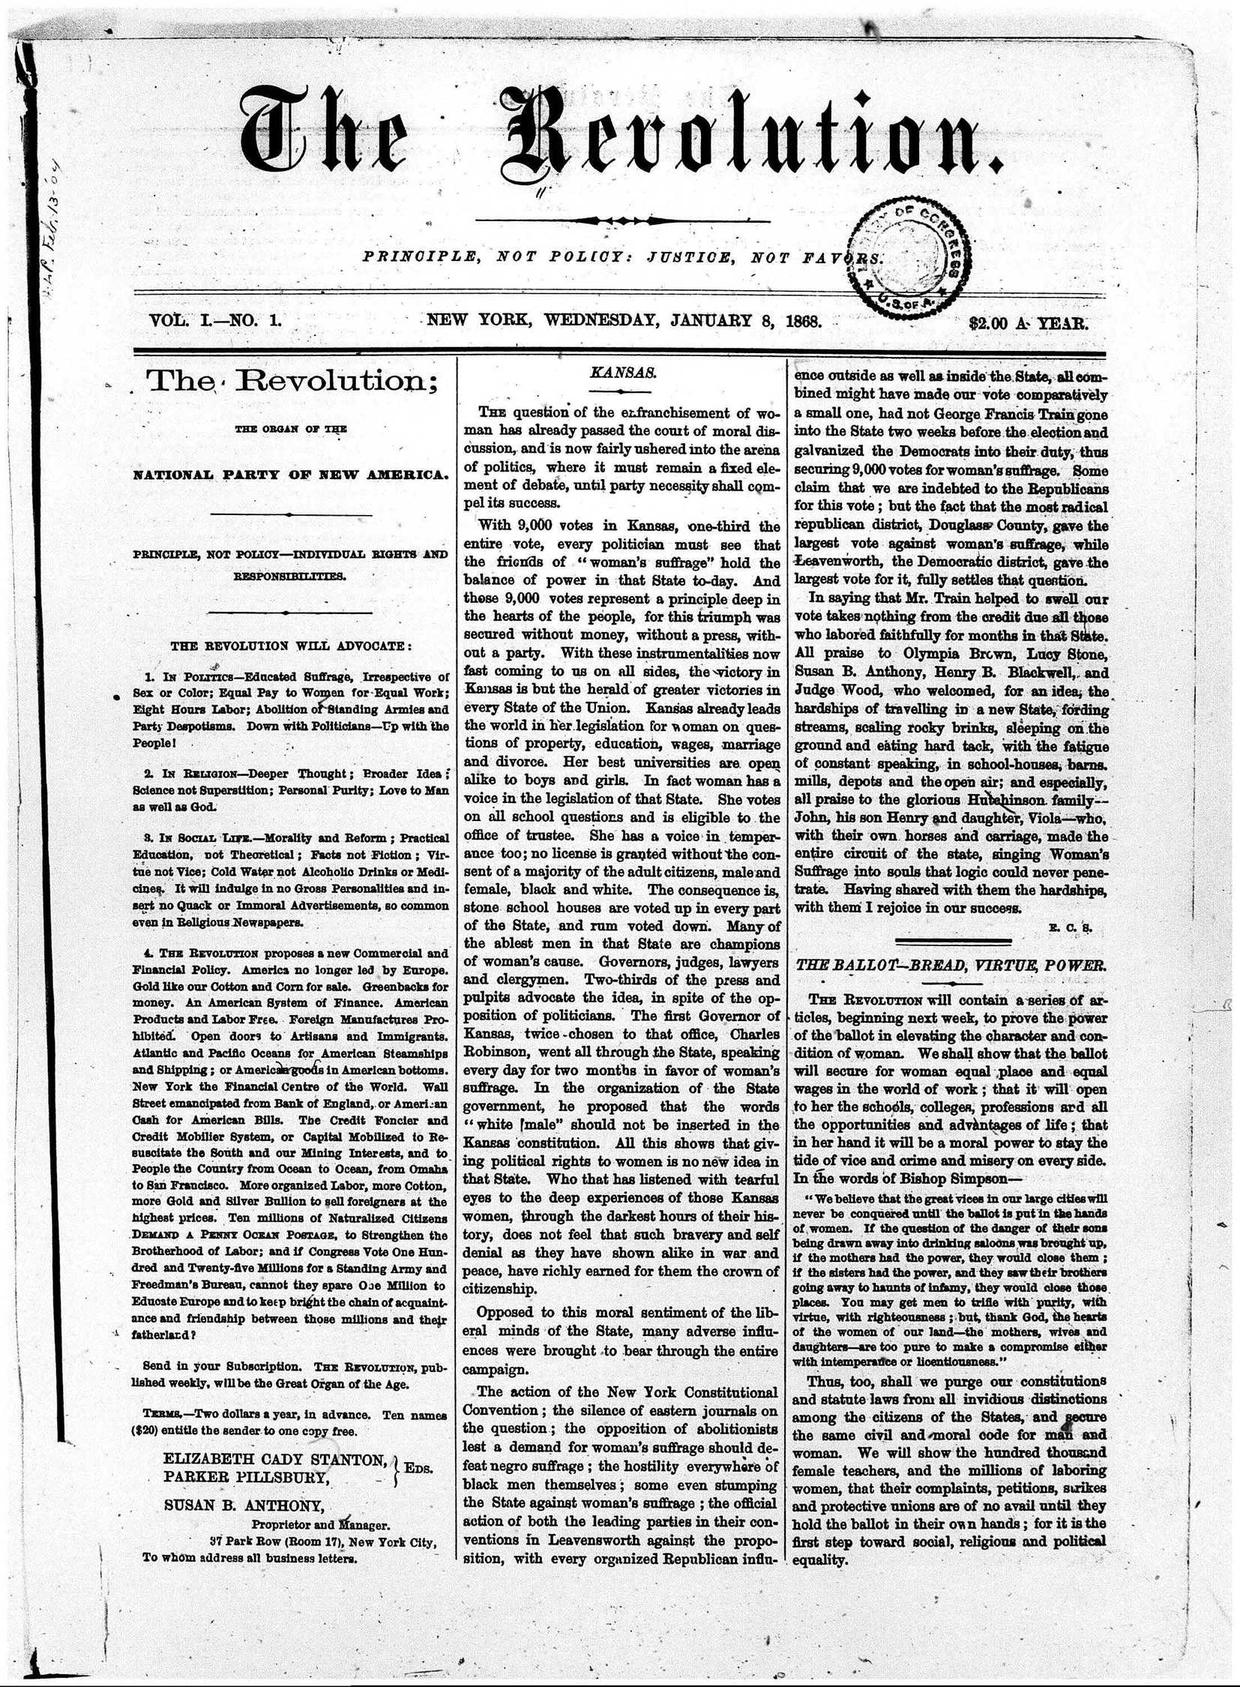 The-Revolution-Susan-B.-Anthony's-Suffrage-Women's-Rights-Newspaper-January-8,-1868